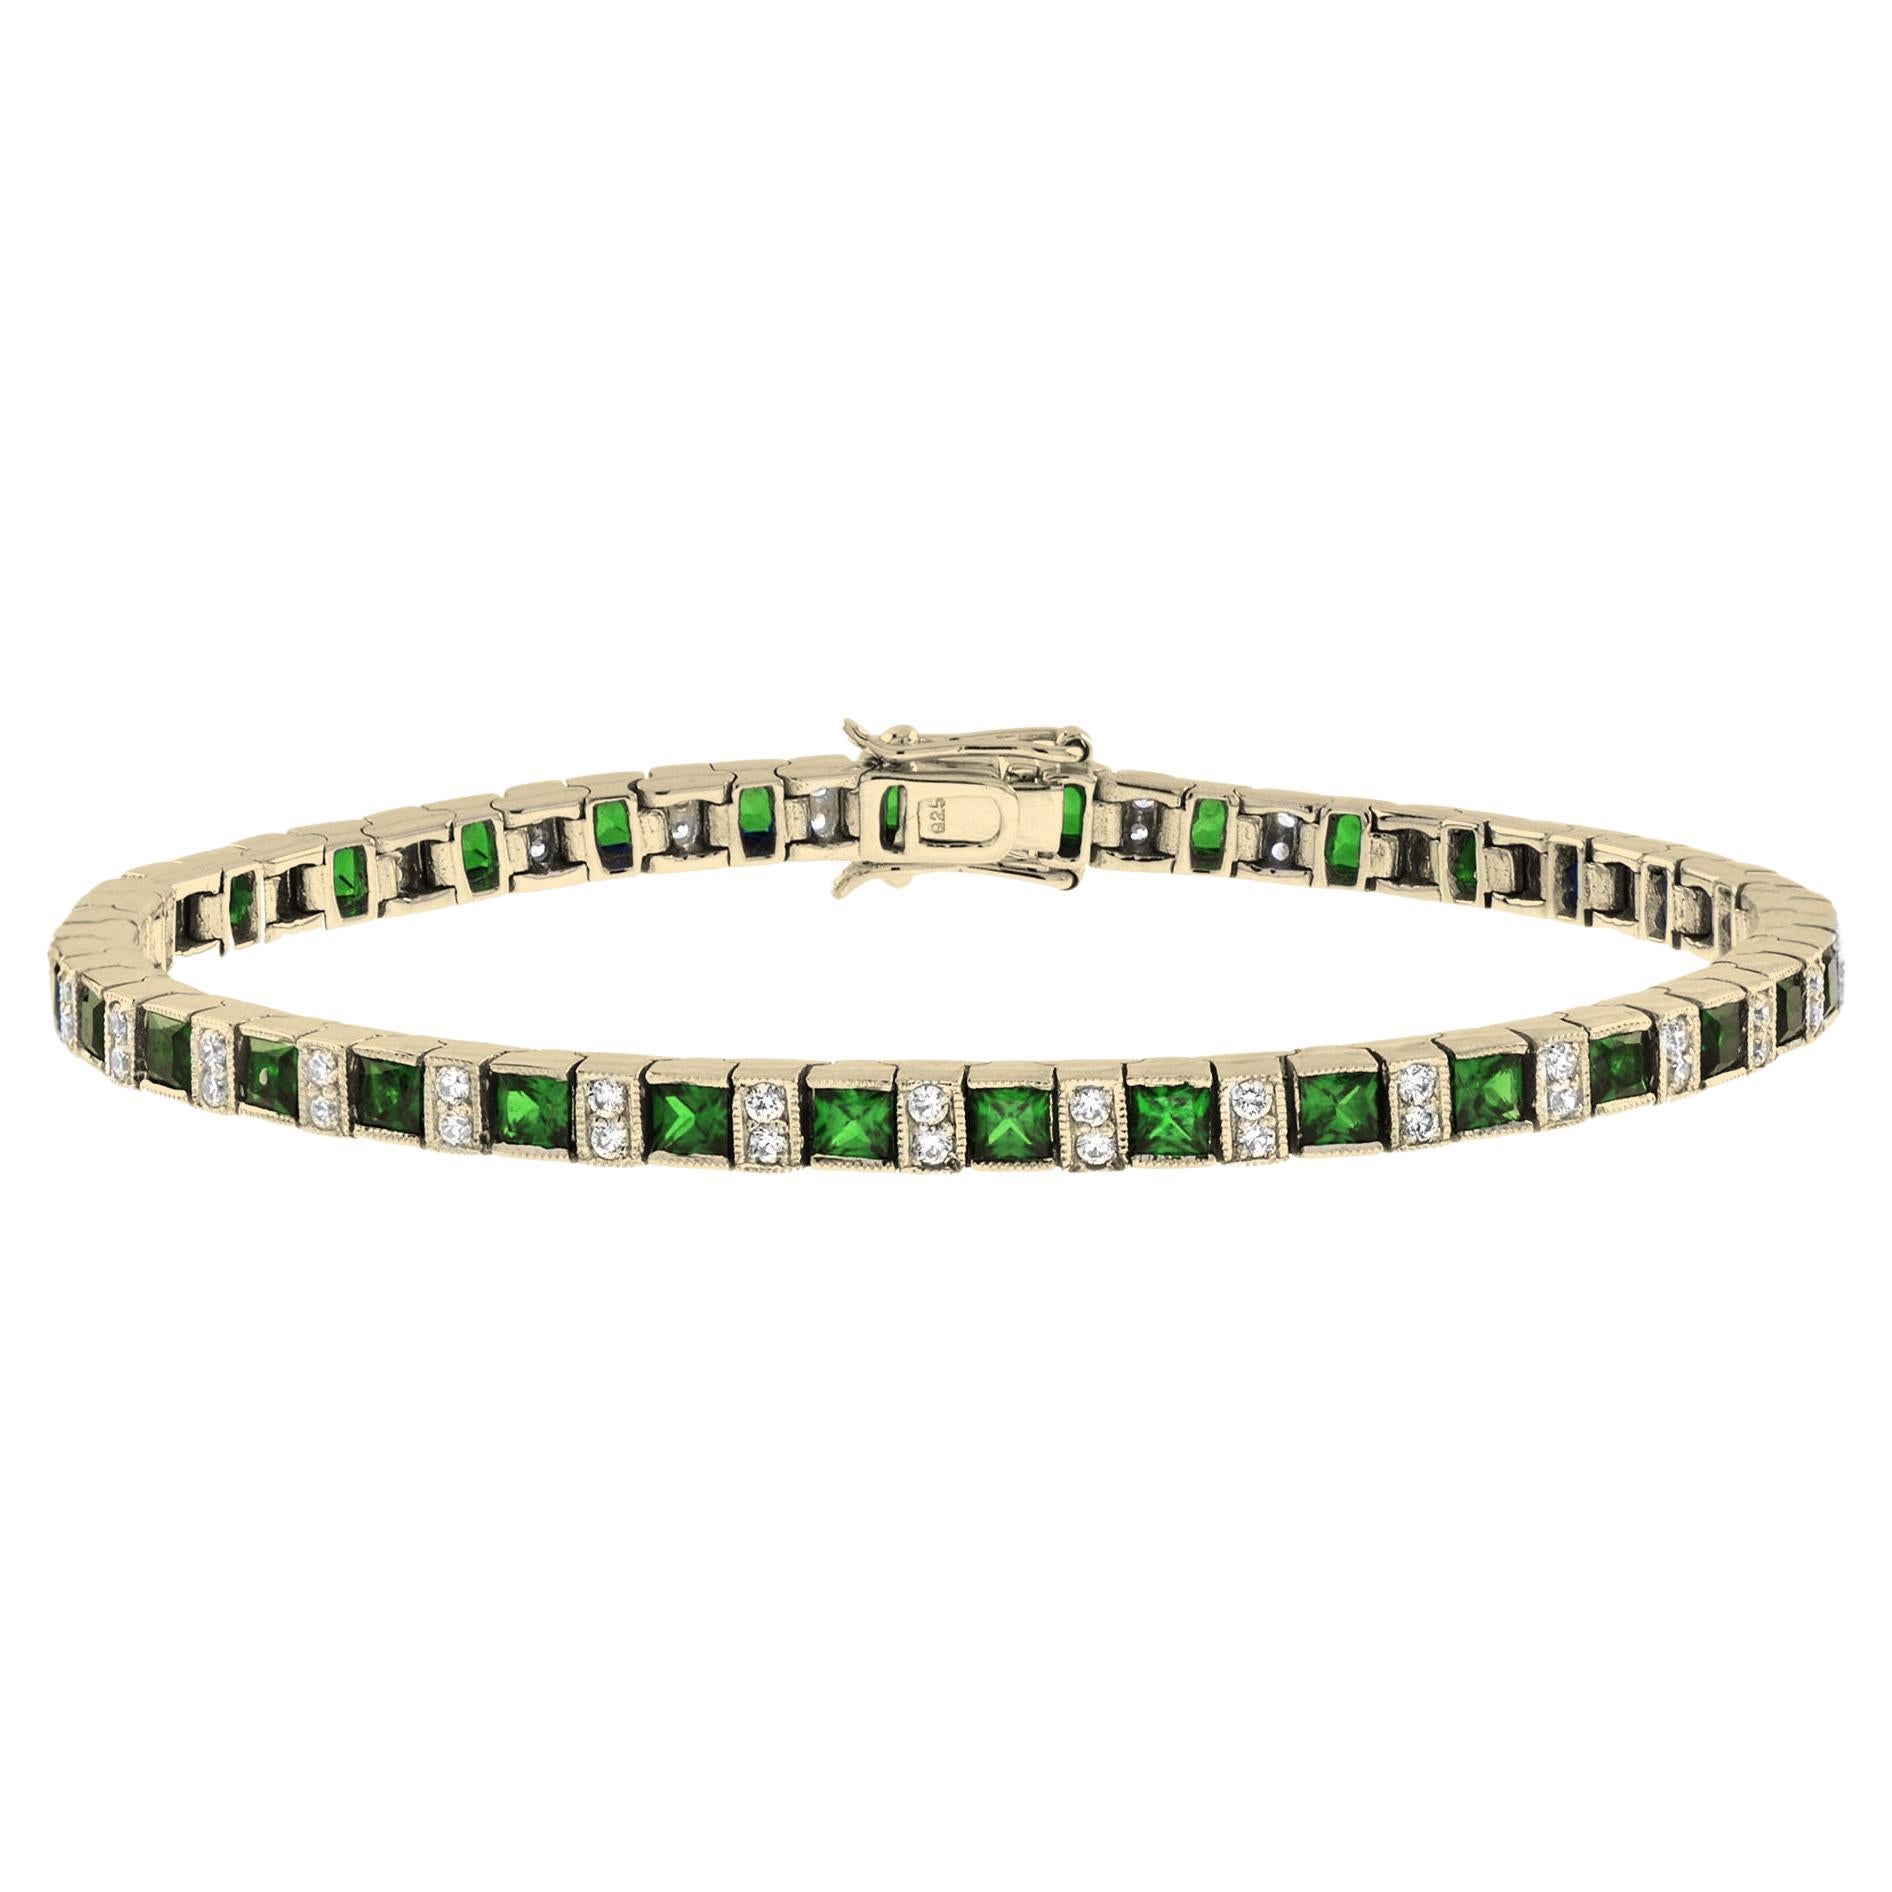 Art Deco Style Alternated Square Emerald and Diamond Bracelet in 14K Yellow Gold